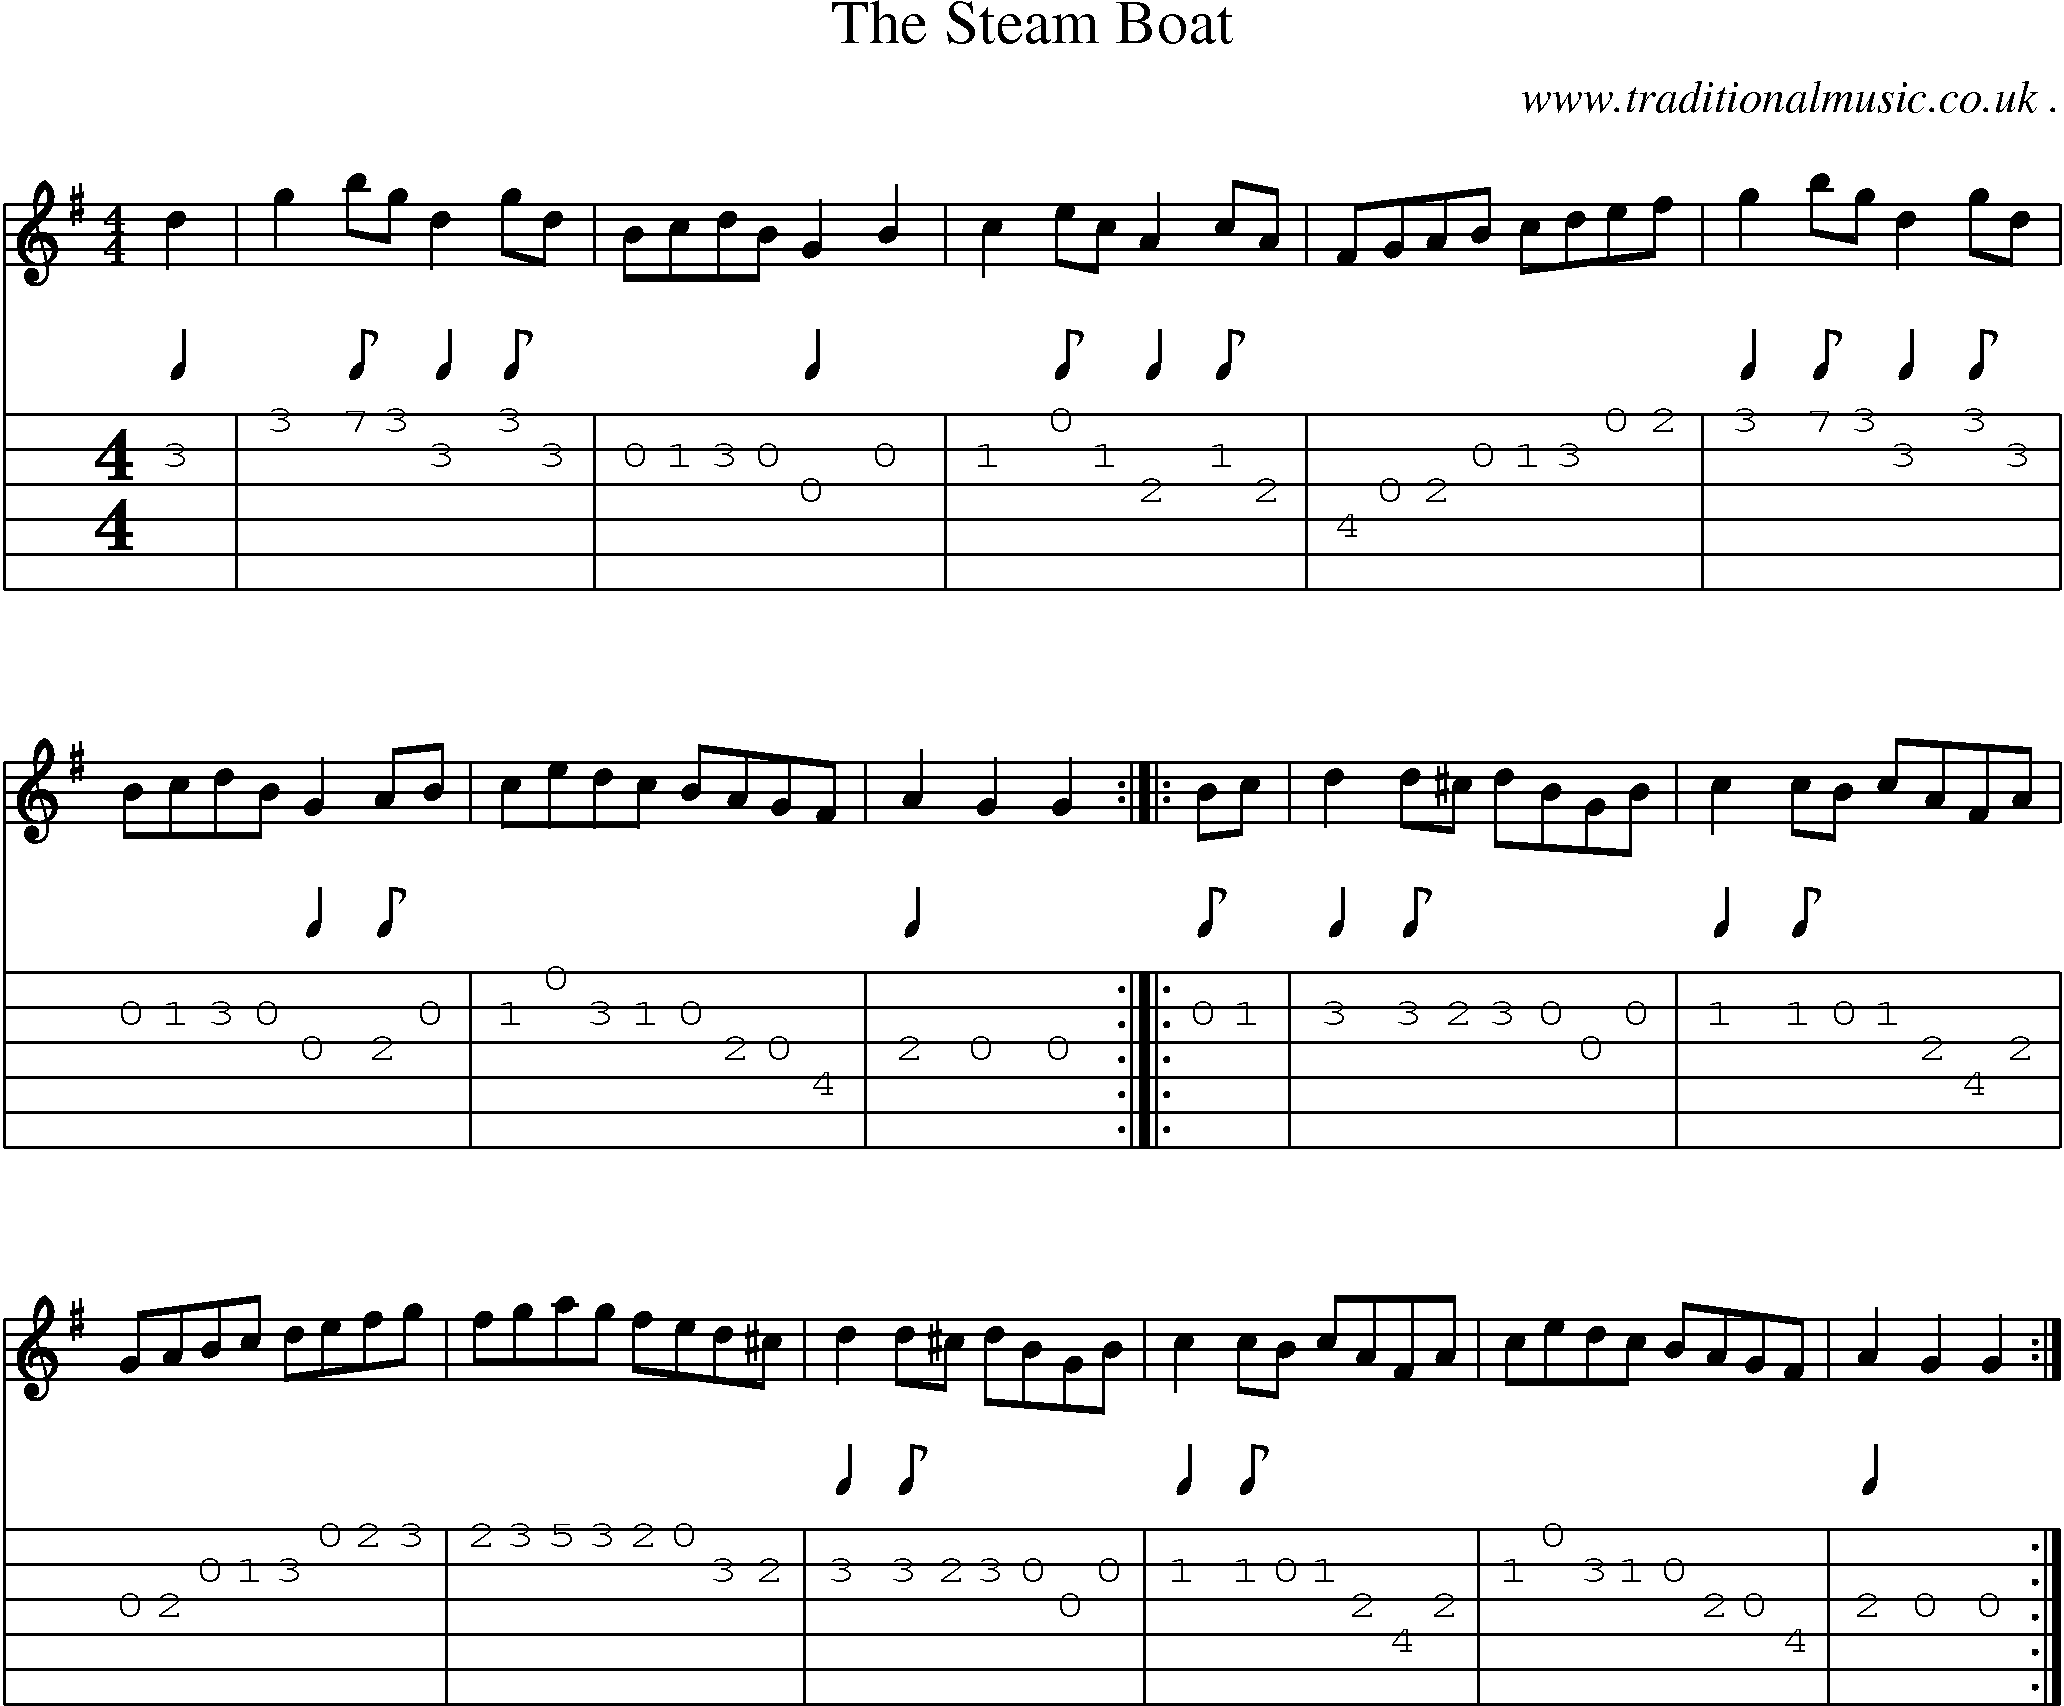 Sheet-music  score, Chords and Guitar Tabs for The Steam Boat